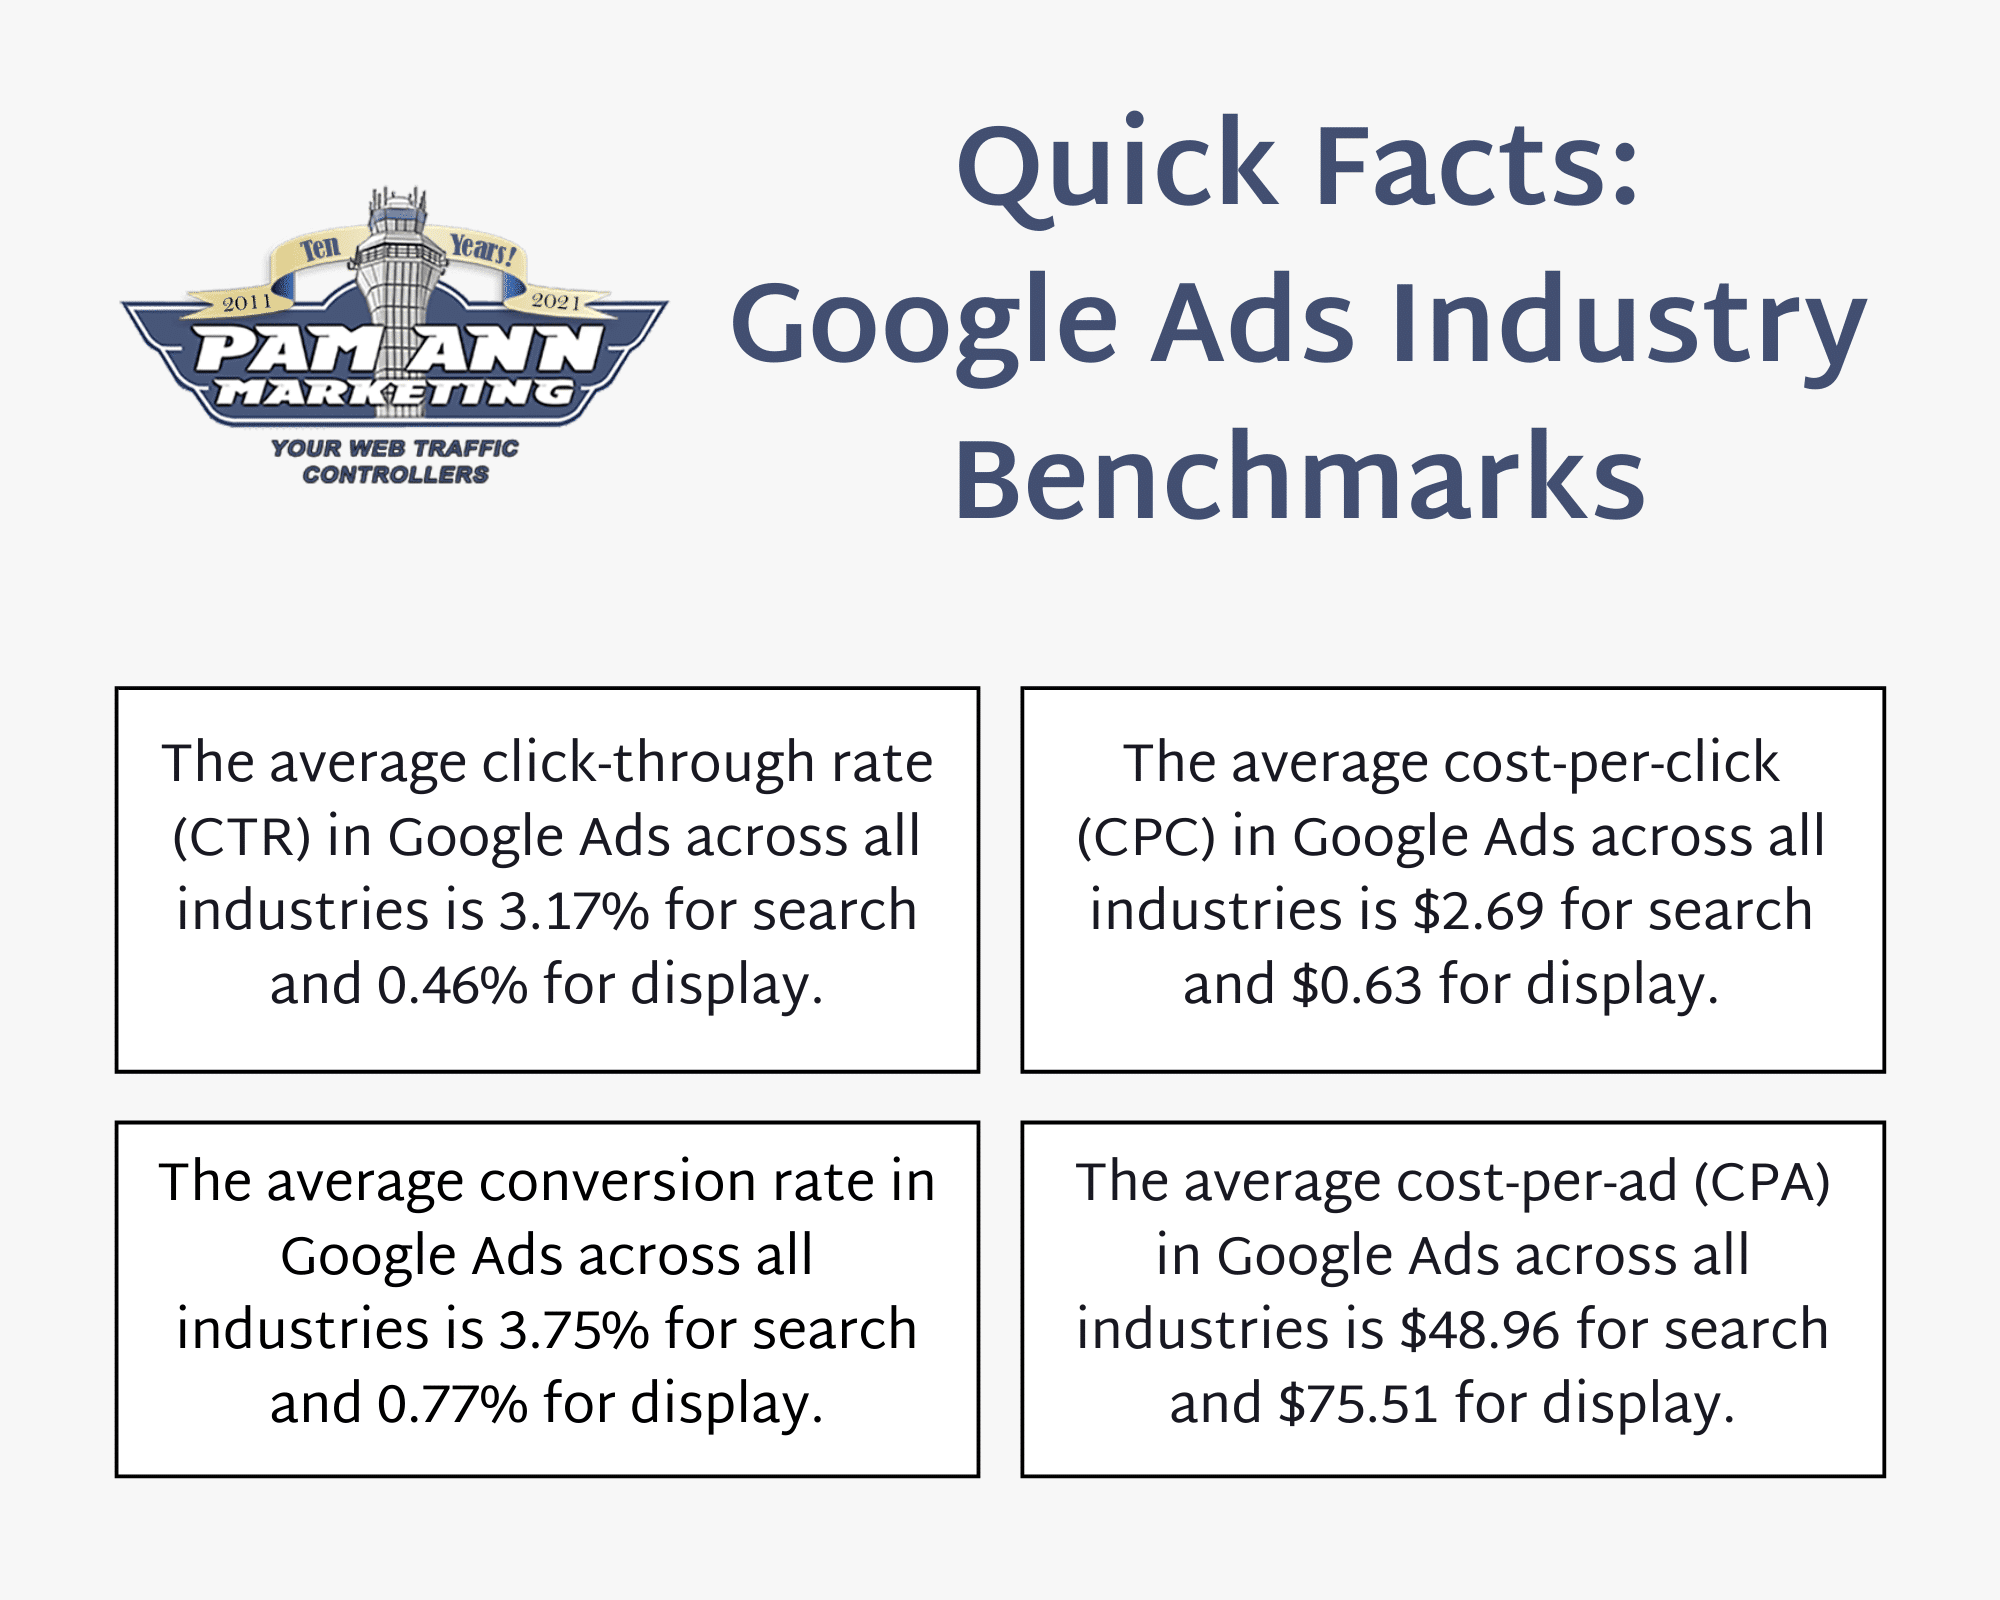 This is a quick-facts graphic depicting the average cost-per-click and Google Ads industry benchmarks.